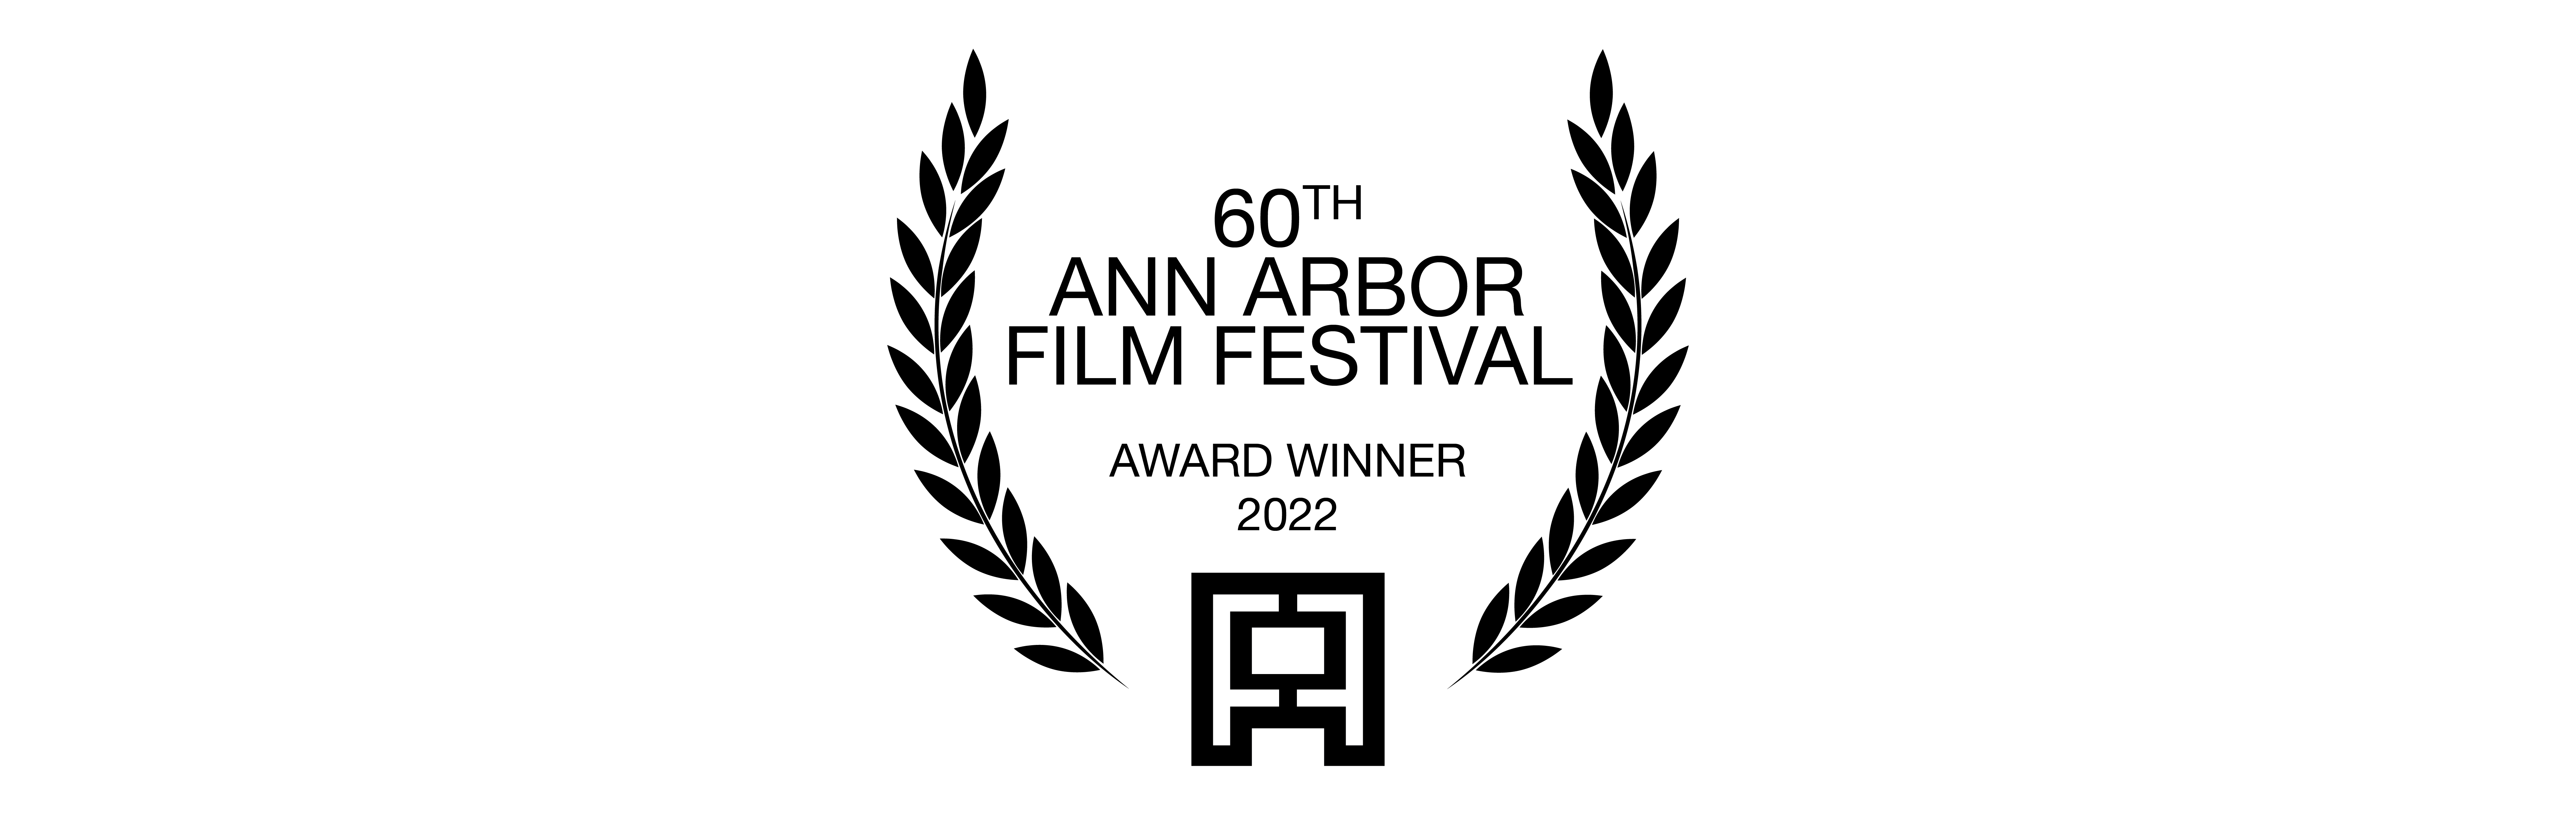 Assistant Professor of Practice Rui Hu Received Best Experimental Animation Award at the 60th Ann Arbor Film Festival